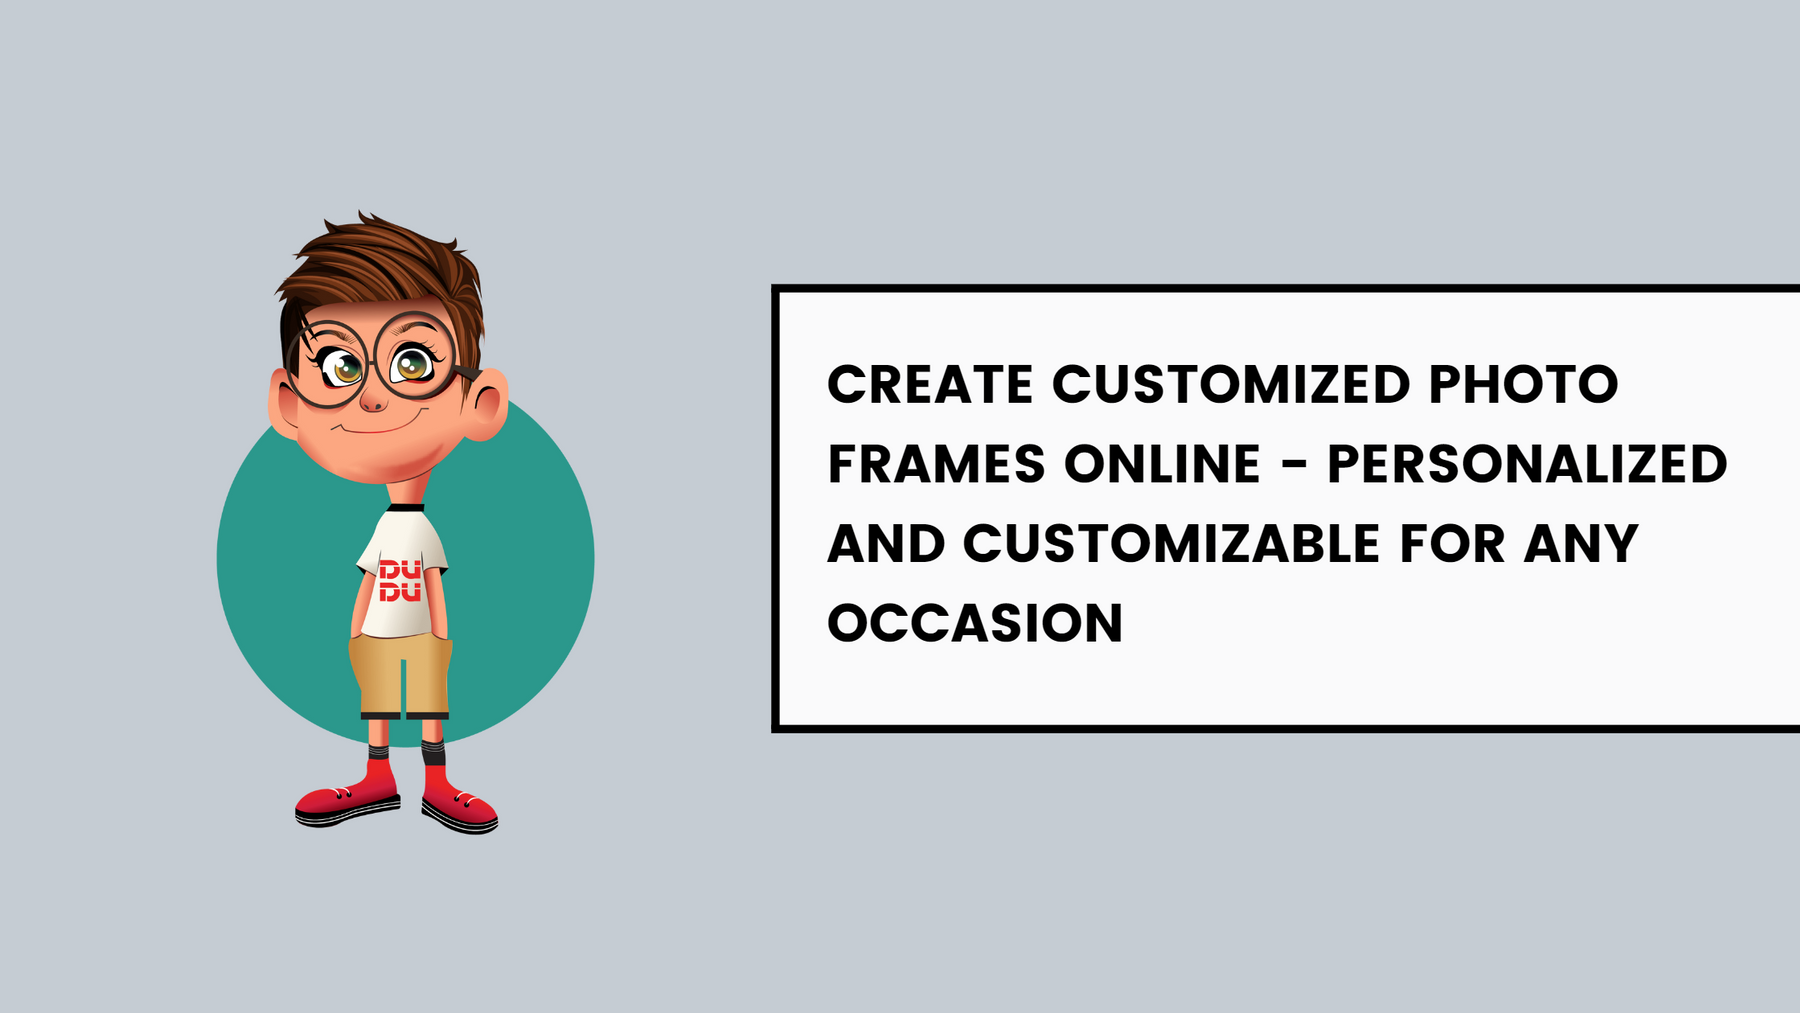 Create Customized Photo Frames Online - Personalized and Customizable for any Occasion